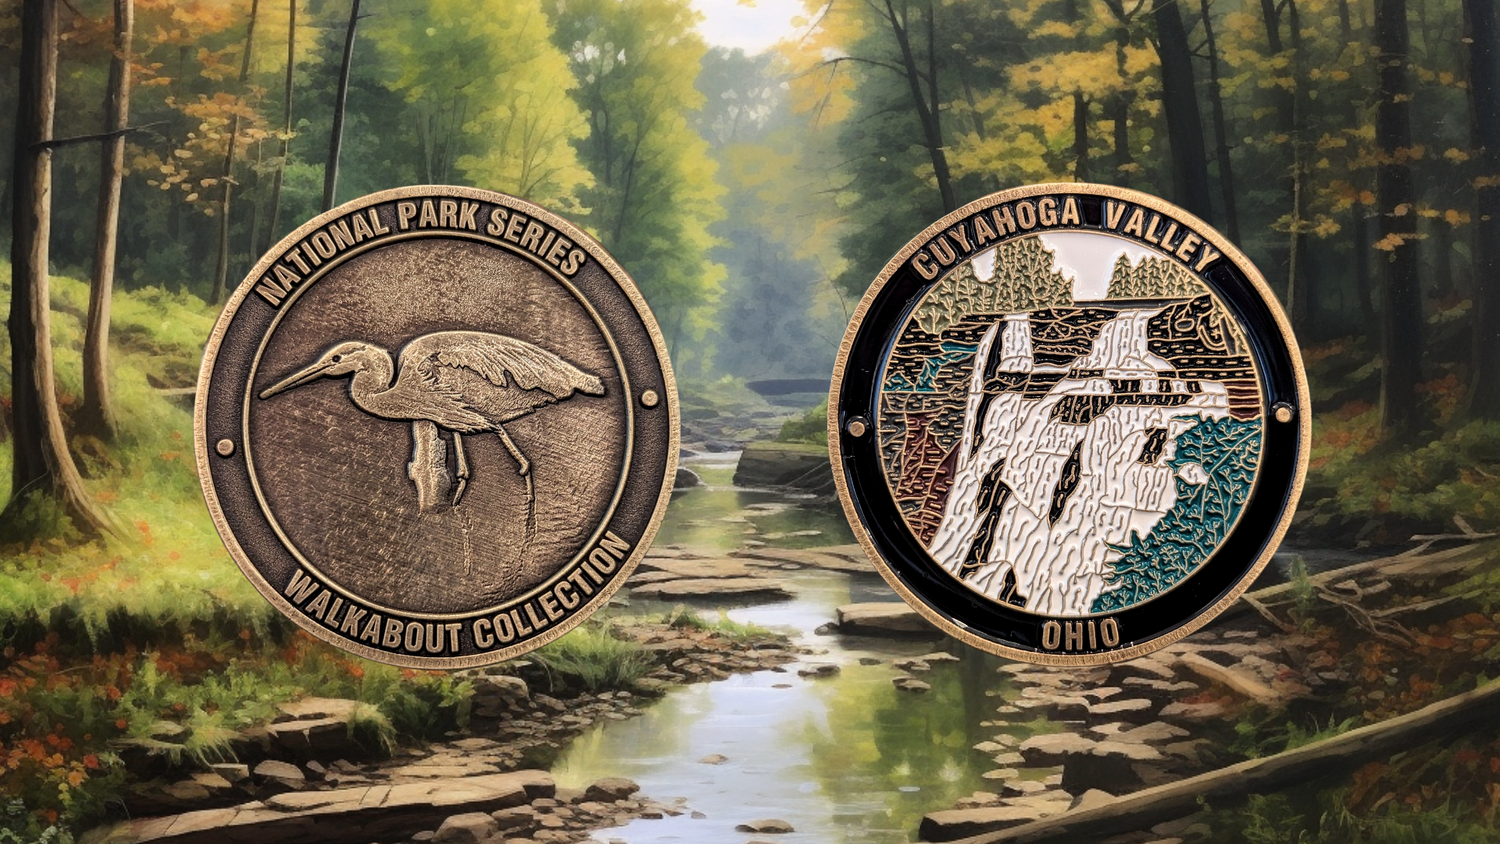 CUYAHOGA VALLEY NATIONAL PARK CHALLENGE COIN